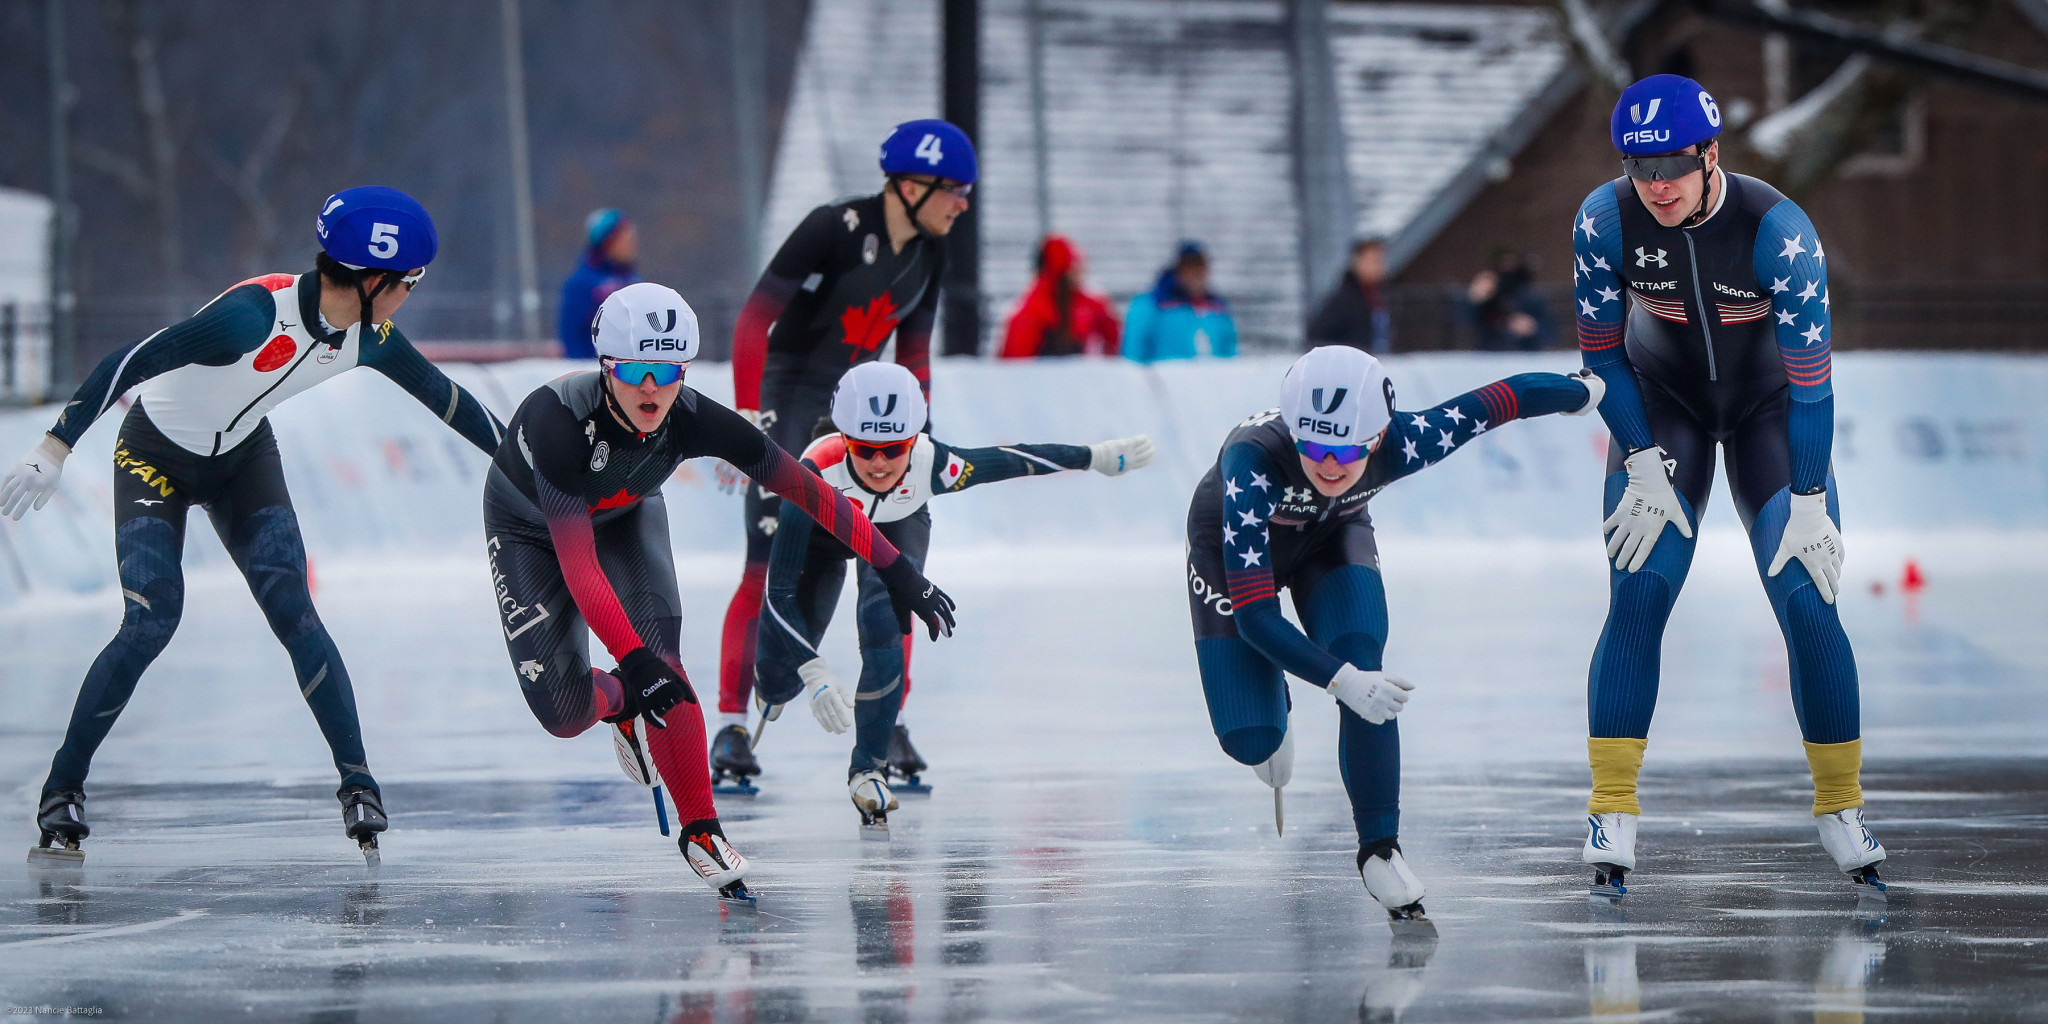 New event delights crowds on first day of short track at Lake Placid 2023